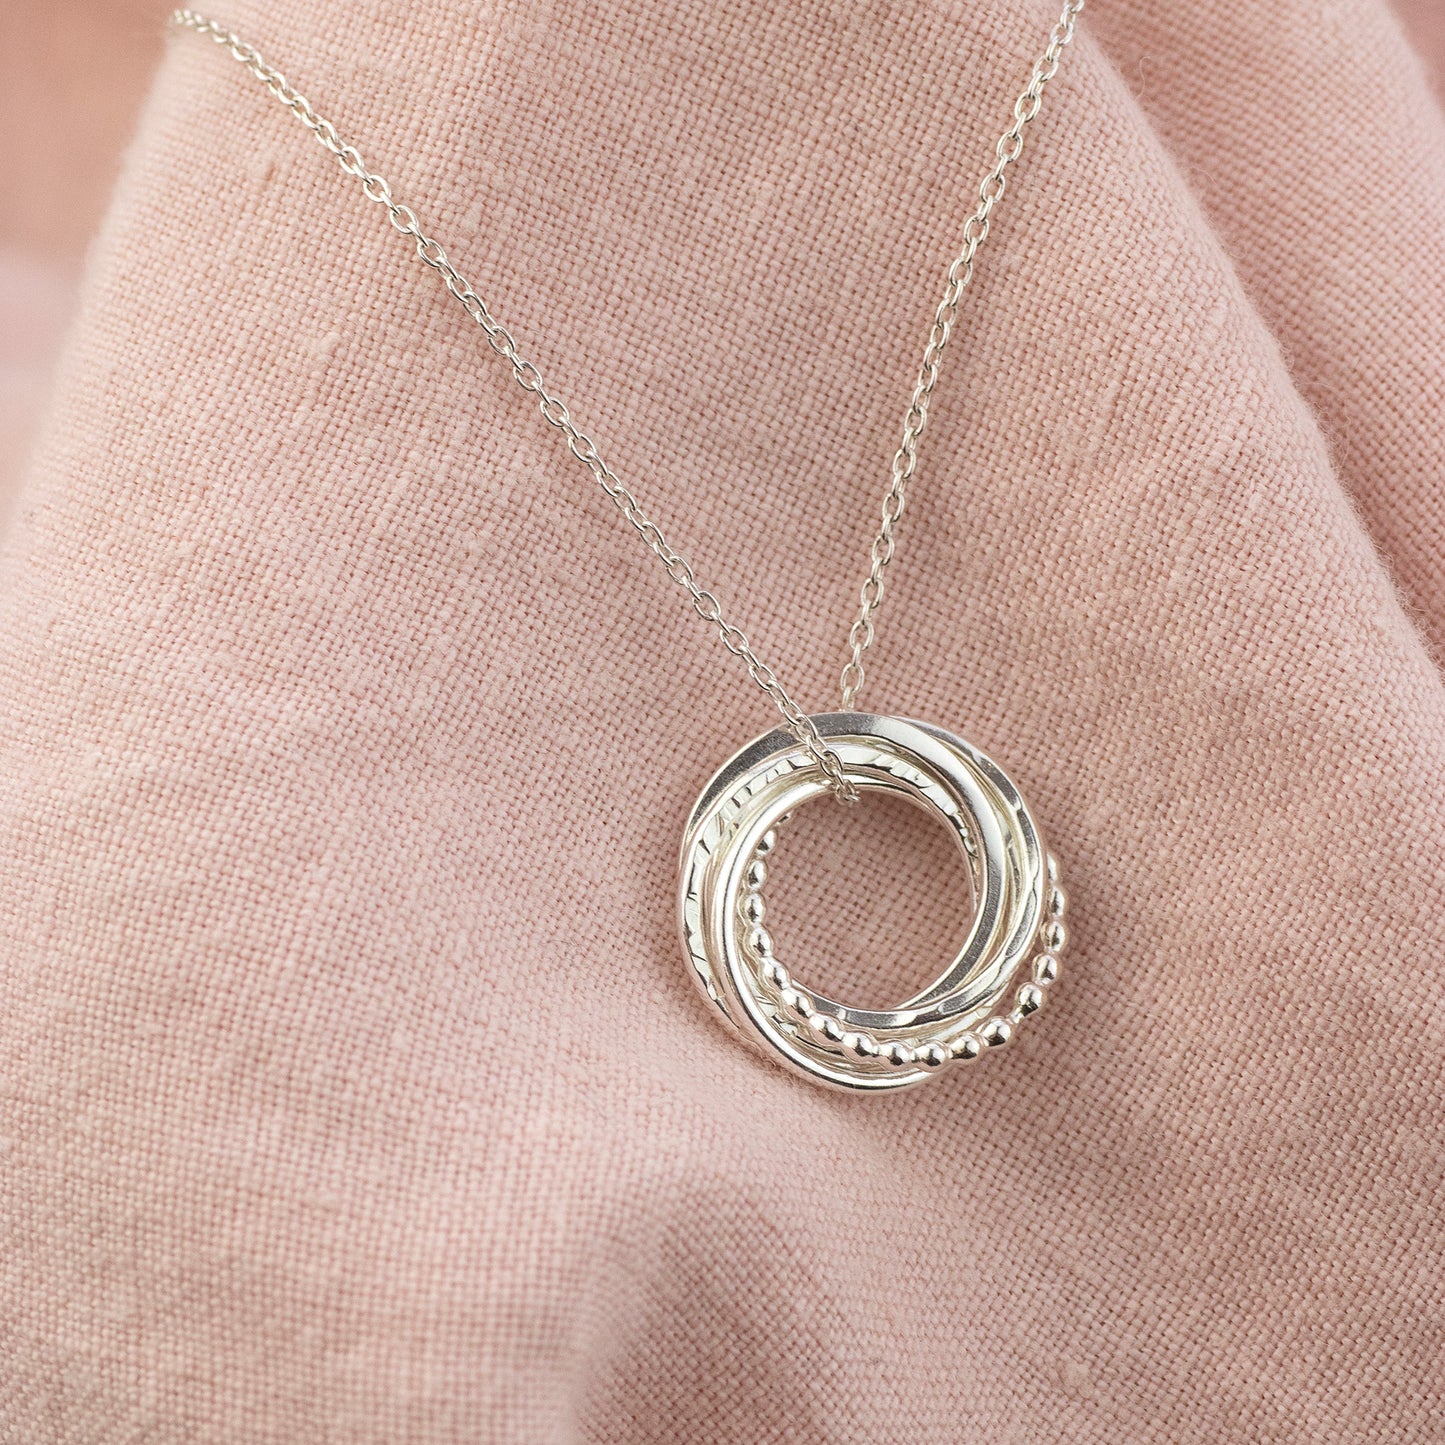 5th Anniversary Necklace - The Original 5 Rings for 5 Years Necklace - Petite Silver